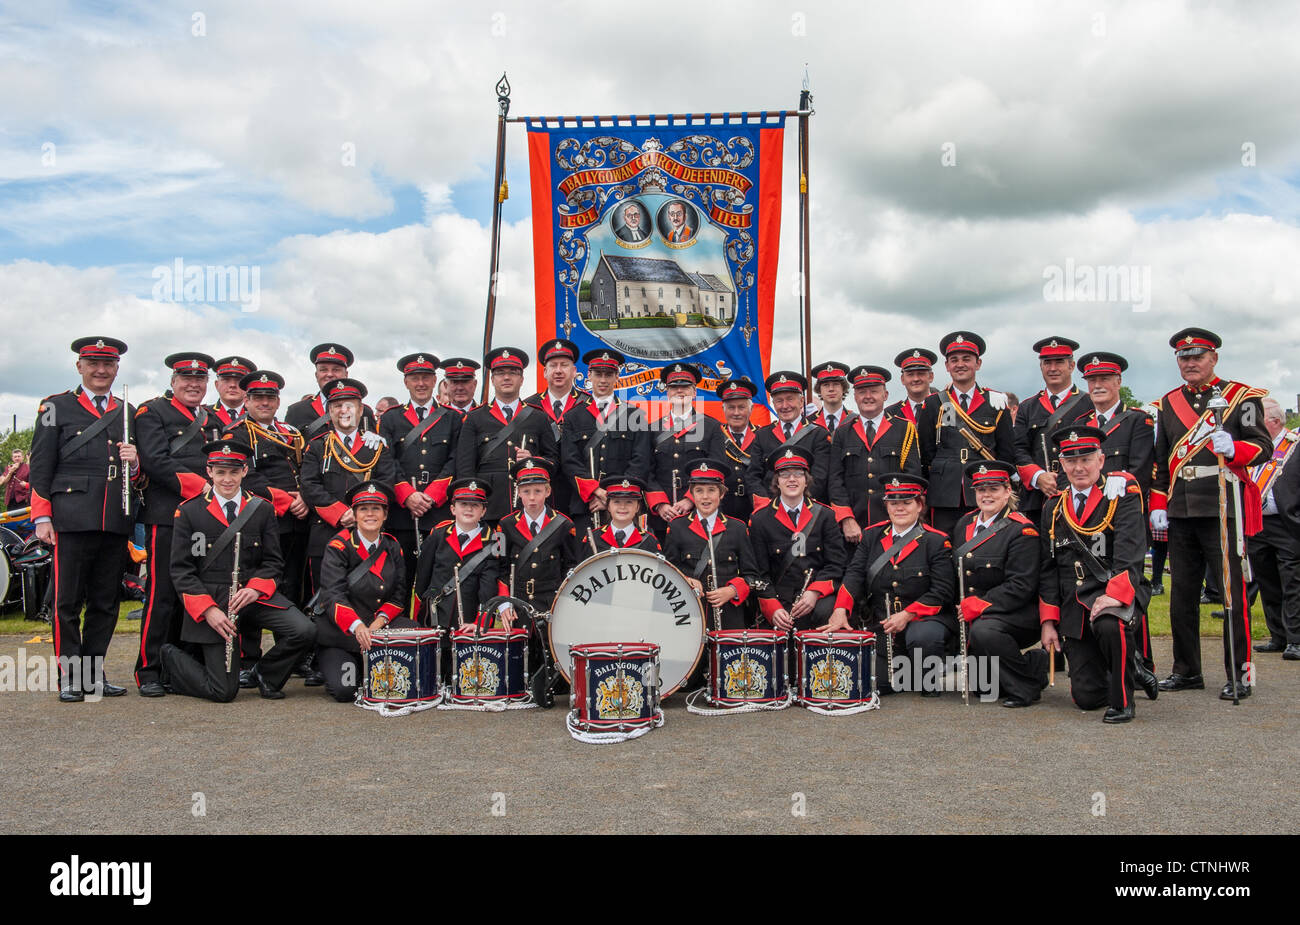 Ballygowan Flute Band pose for photograph in Ballynahinch Twelfth July Orange Parade, behind is the banner of Ballygowan Church Stock Photo